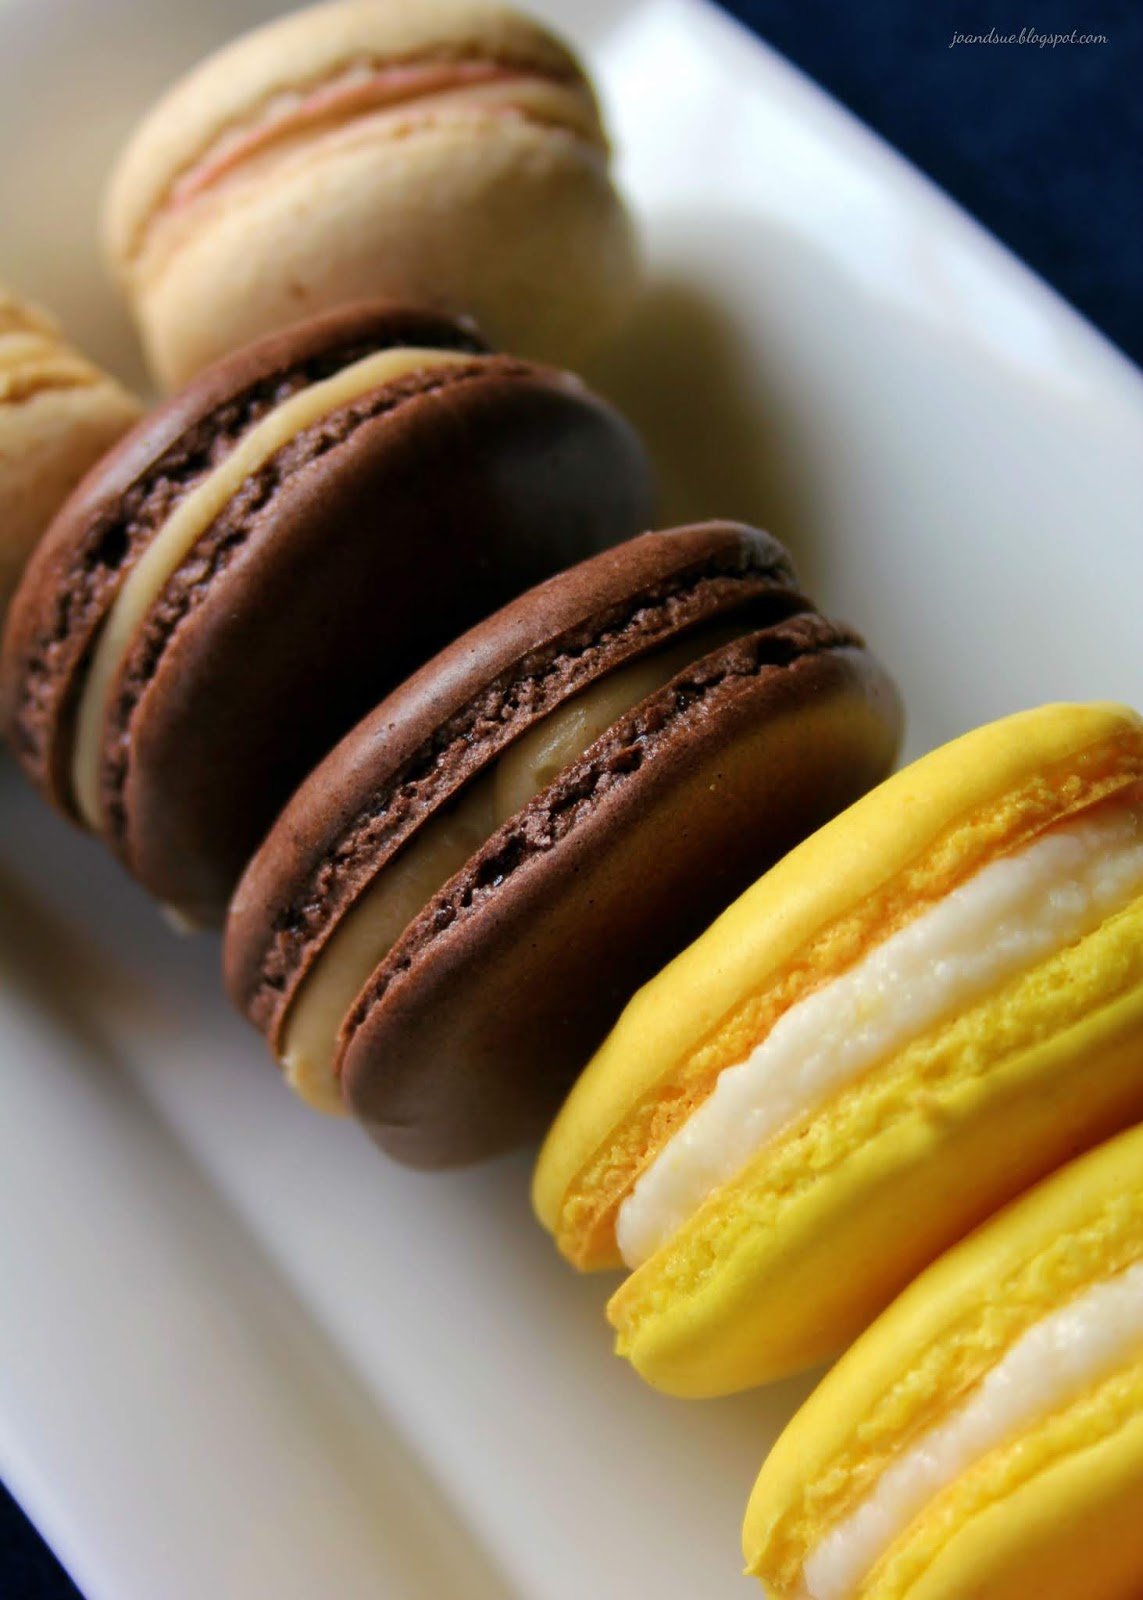 Jo and Sue: Macarons (Peanut Butter Cup and Lemon)